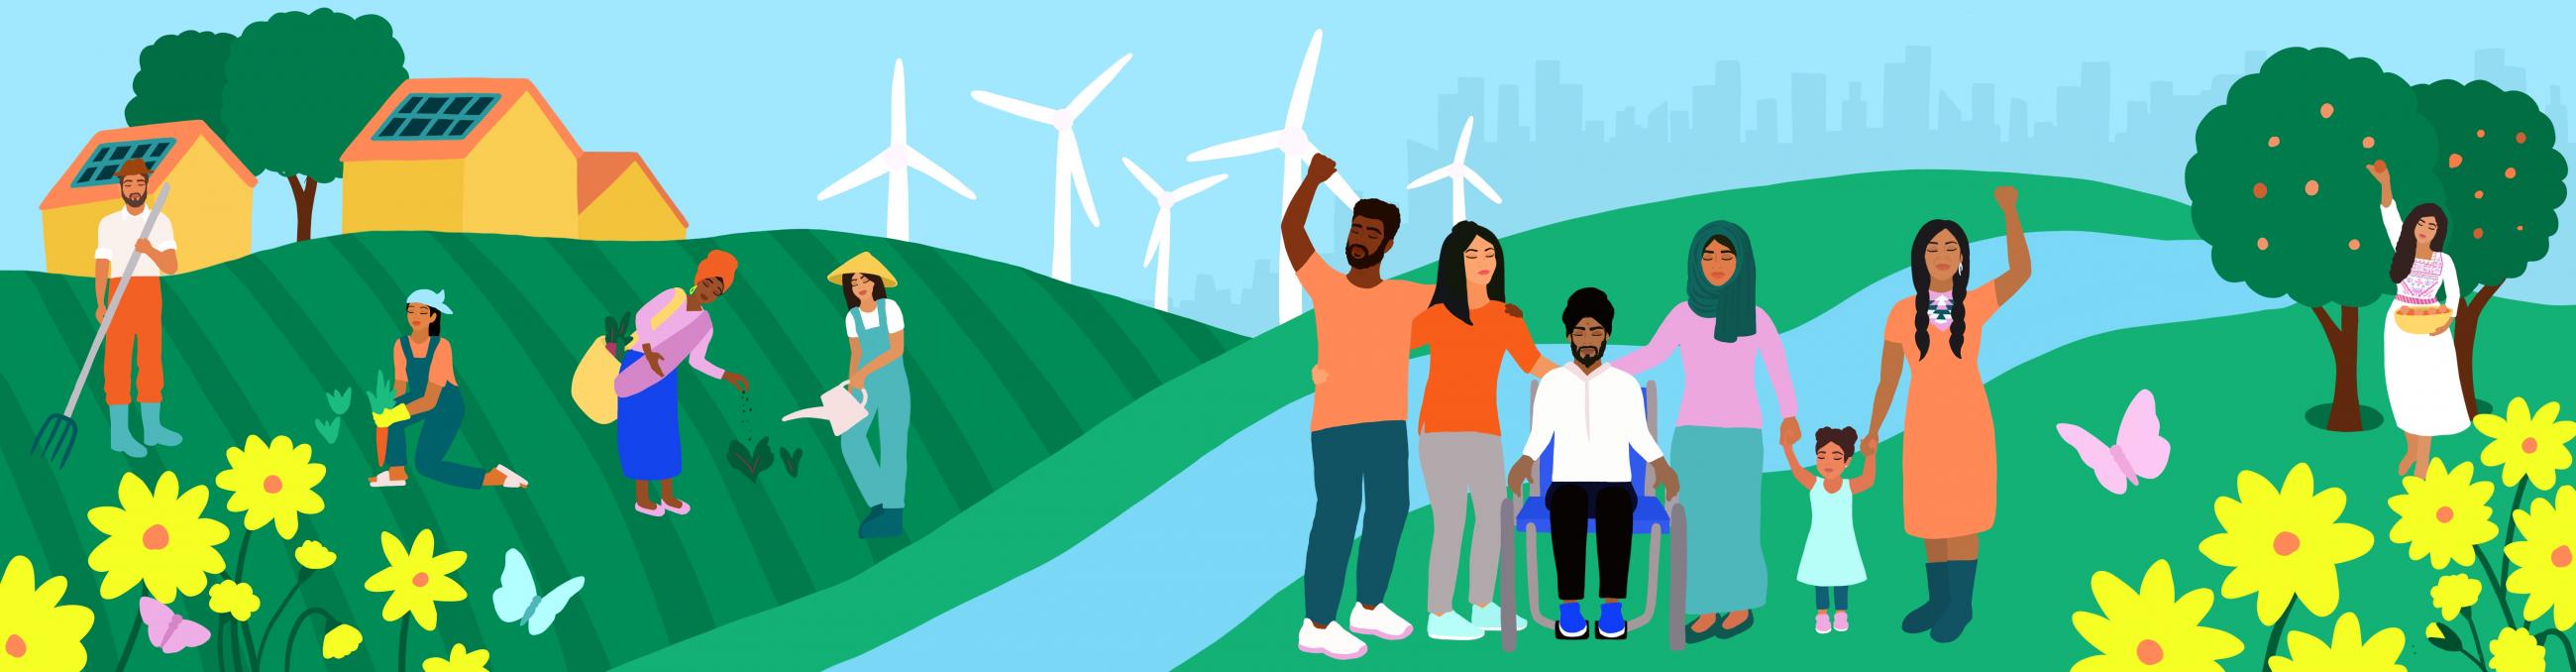 Illustration of an ideal world of justice: a multi-generational, multi-racial family gathers, some with raised fists. Around them, a flourishing hillside is farmed, a stream passes behind them, wind turbines turn behind them, and so on.